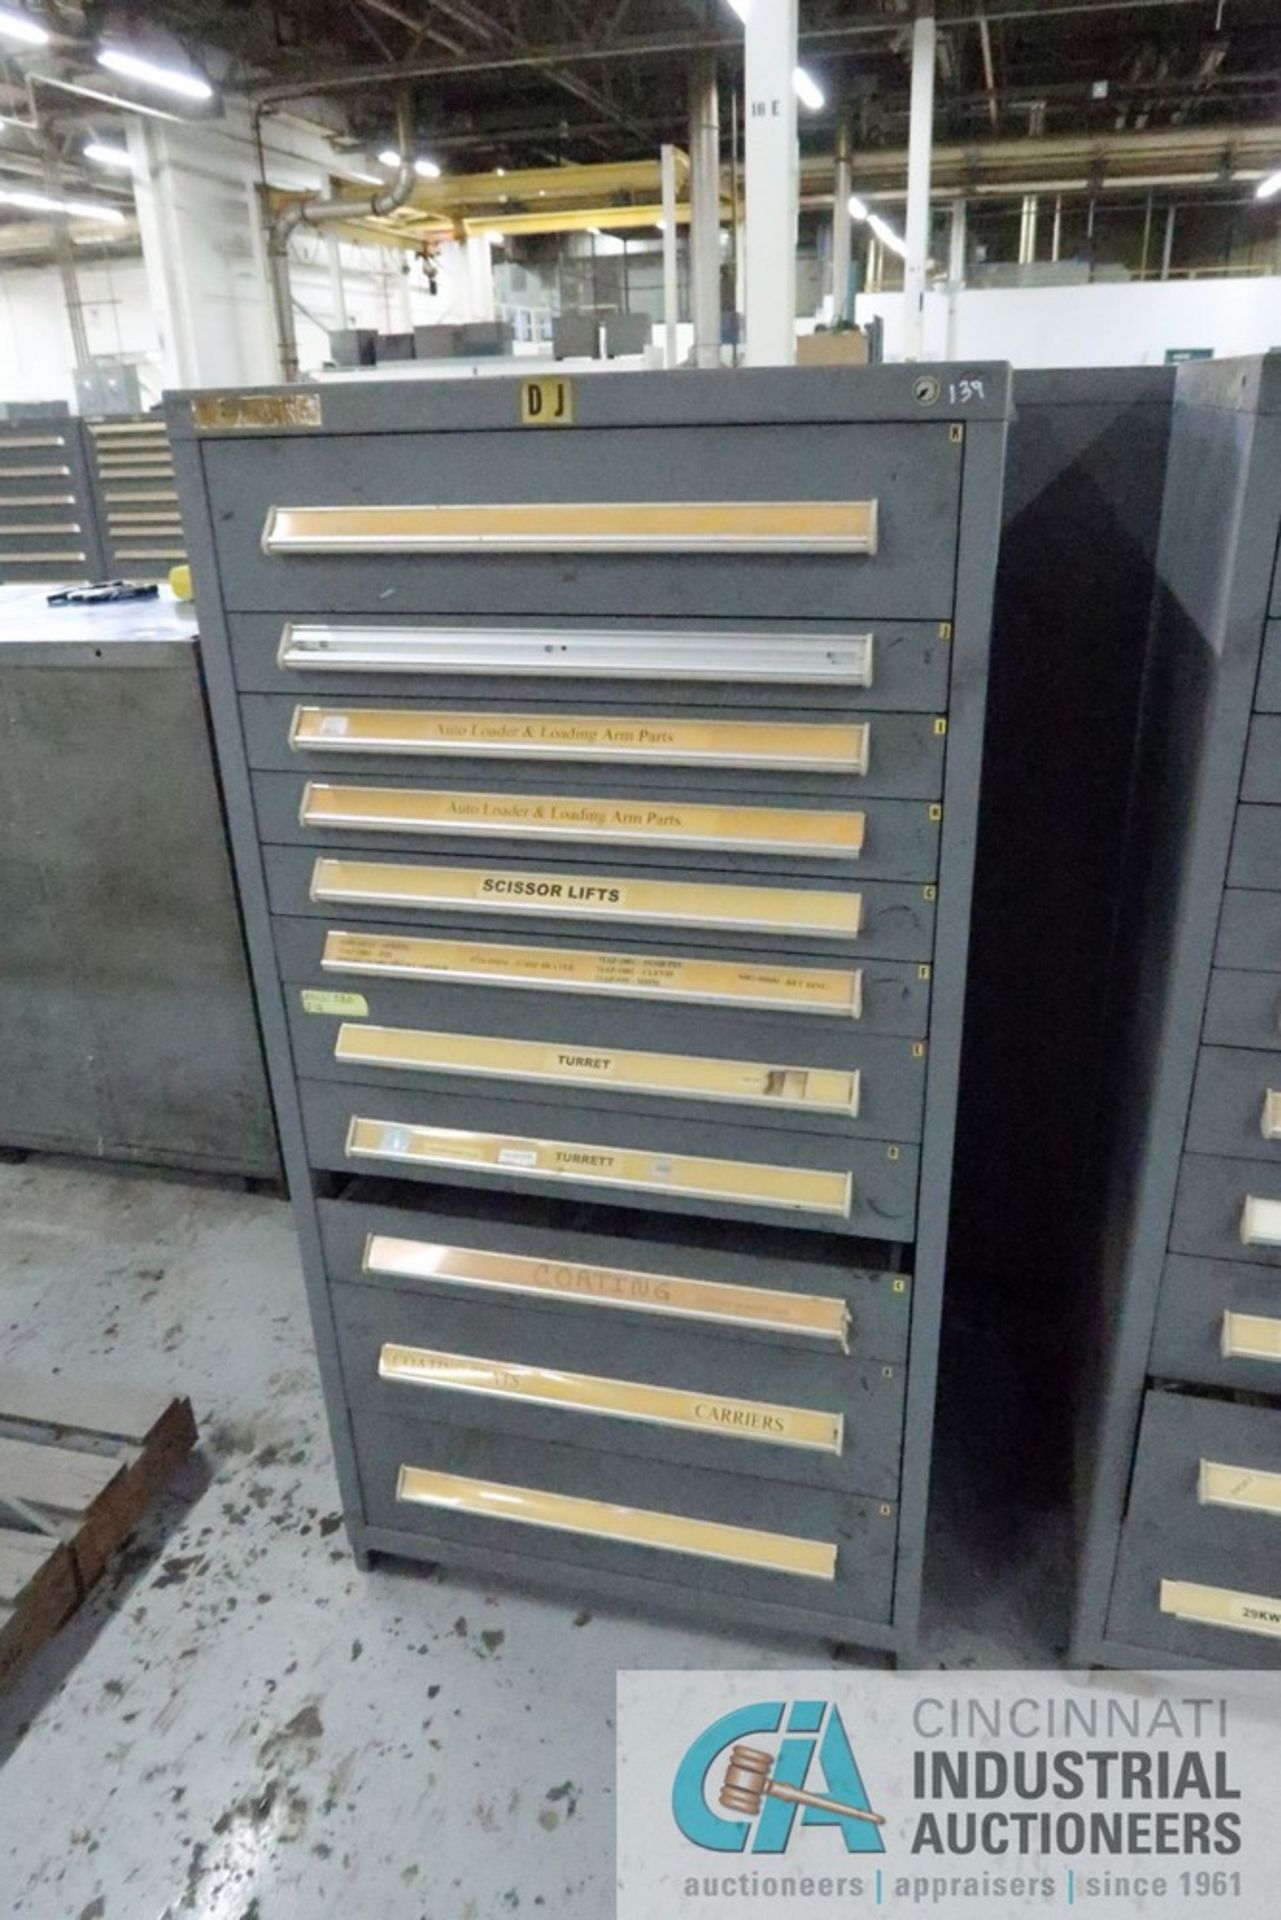 11-DRAWER VIDMAR CABINET WITH CONTENTS INCLUDING MISCELLANEOUS LOADER ARM PARTS, TURRET PARTS,